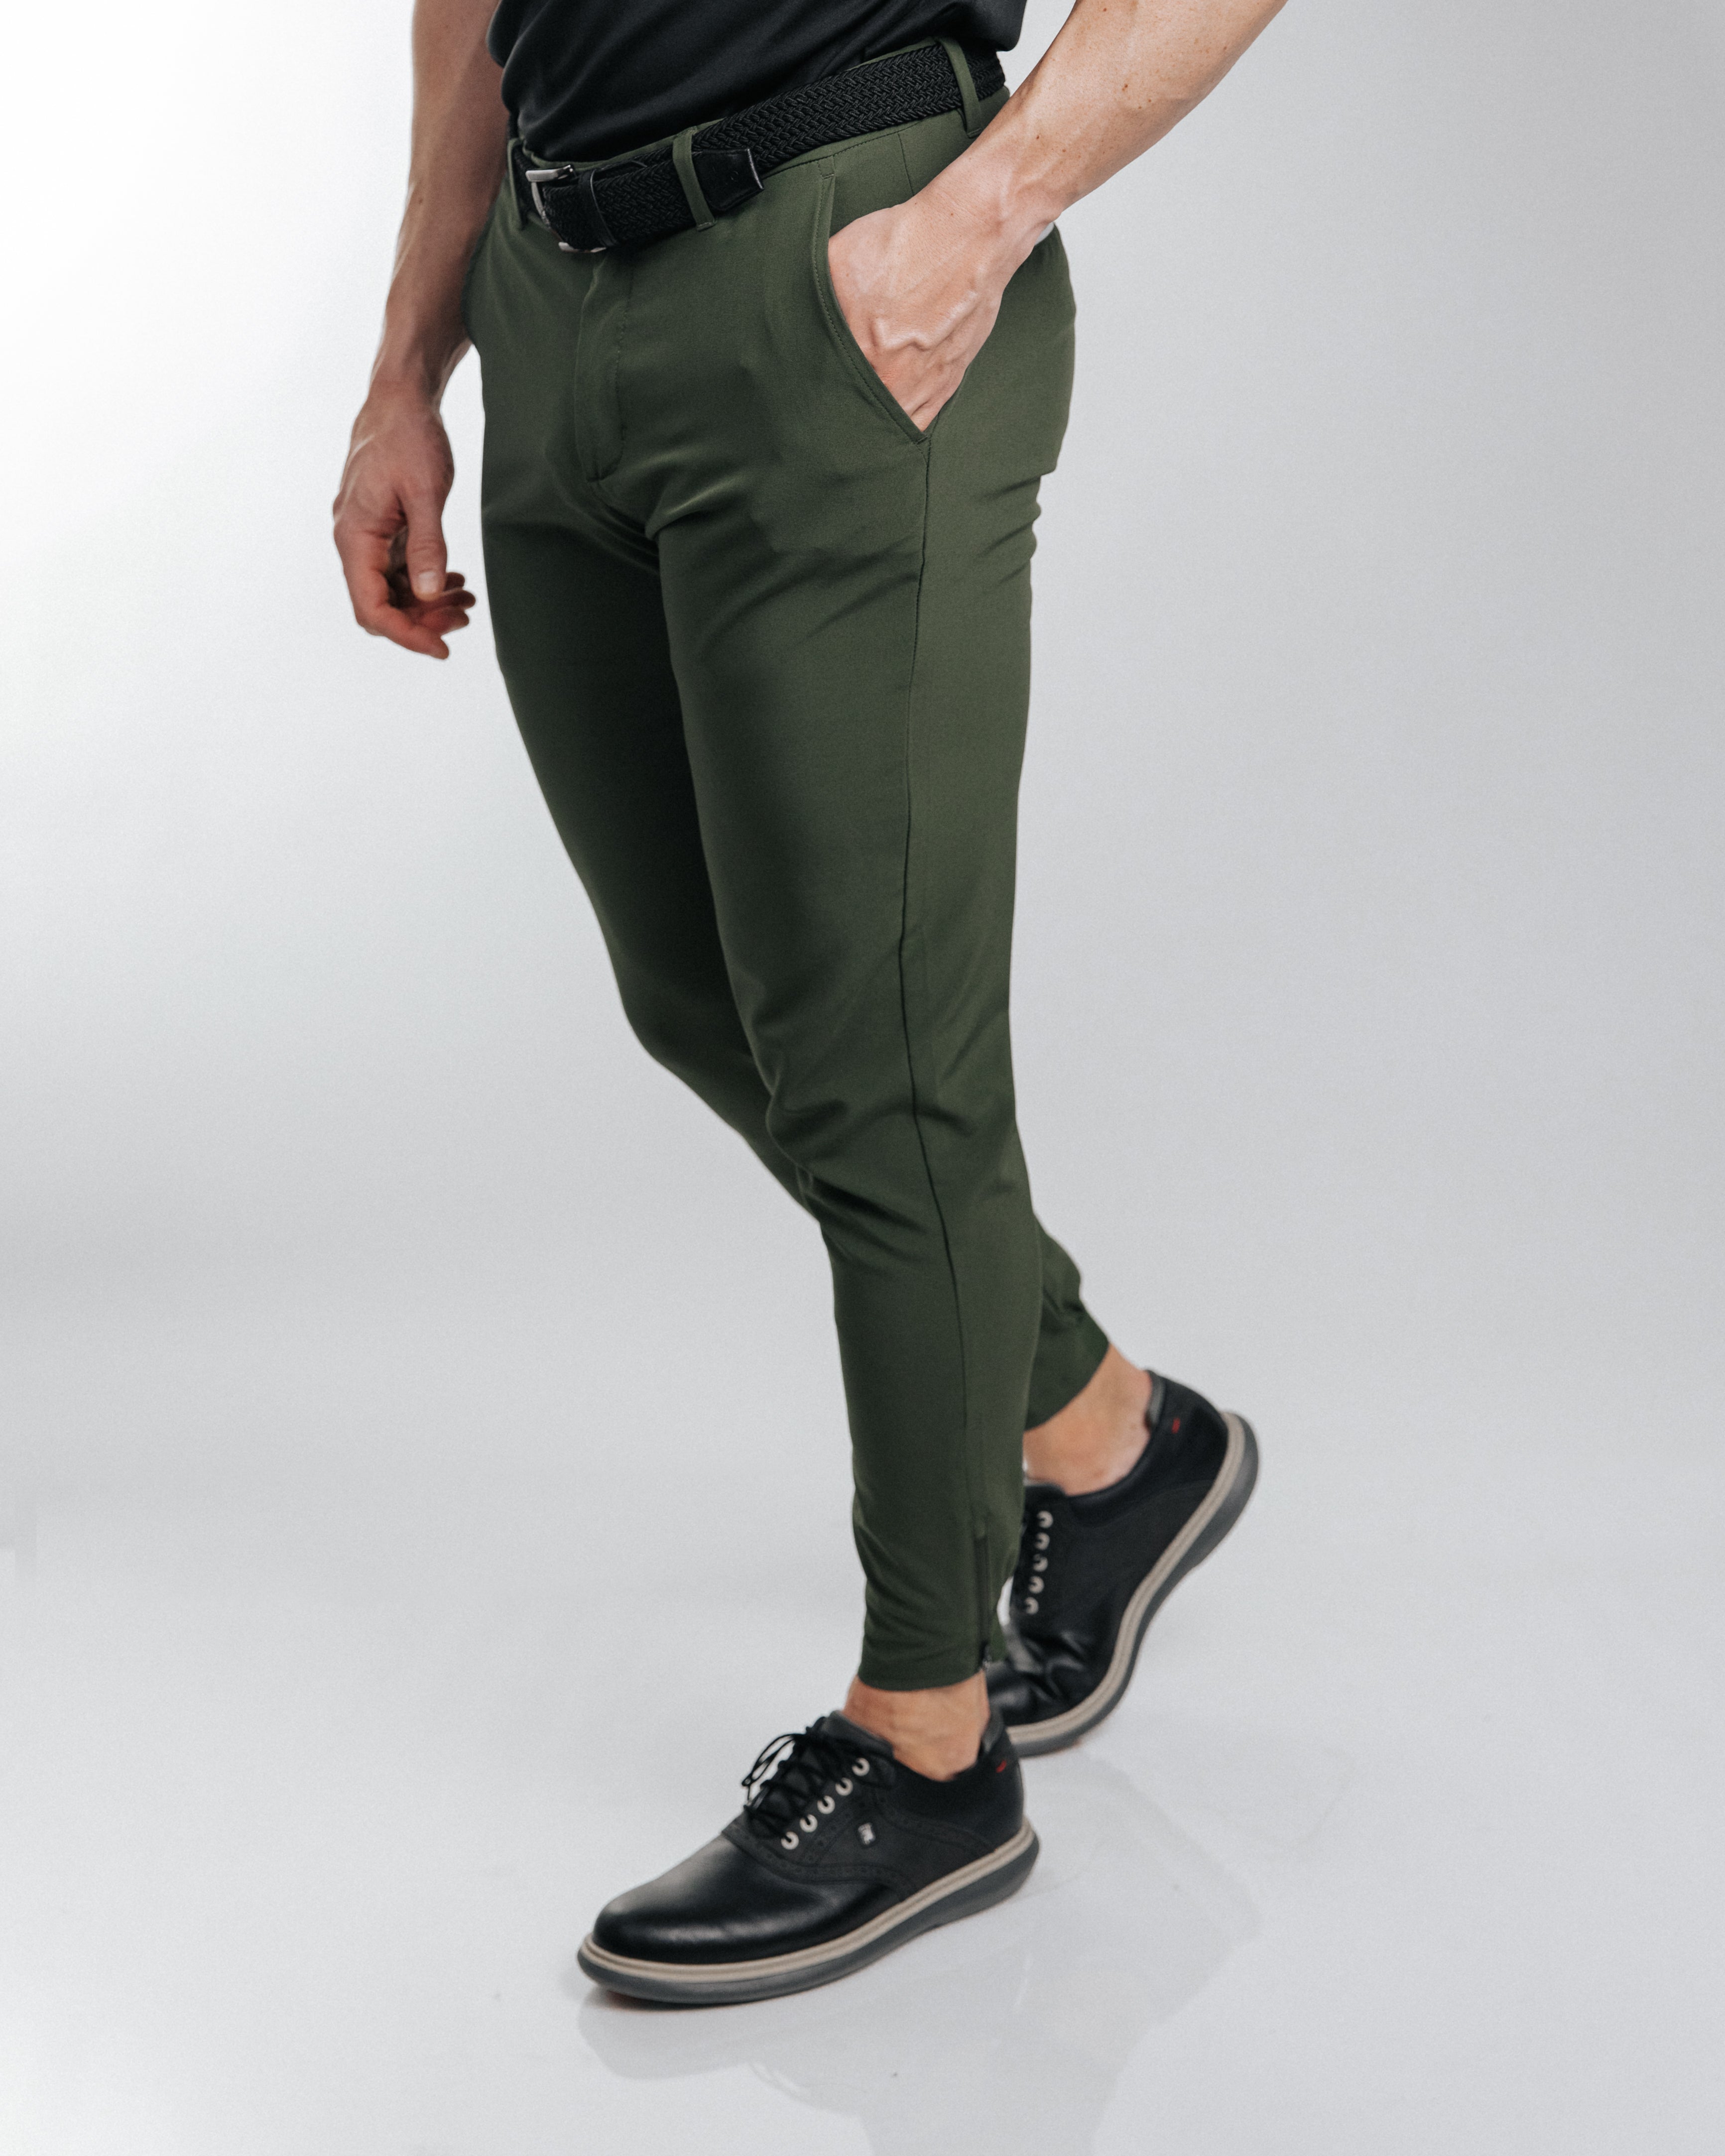 Black Bomber Jacket with Olive Pants Outfits For Men (33 ideas & outfits) |  Lookastic